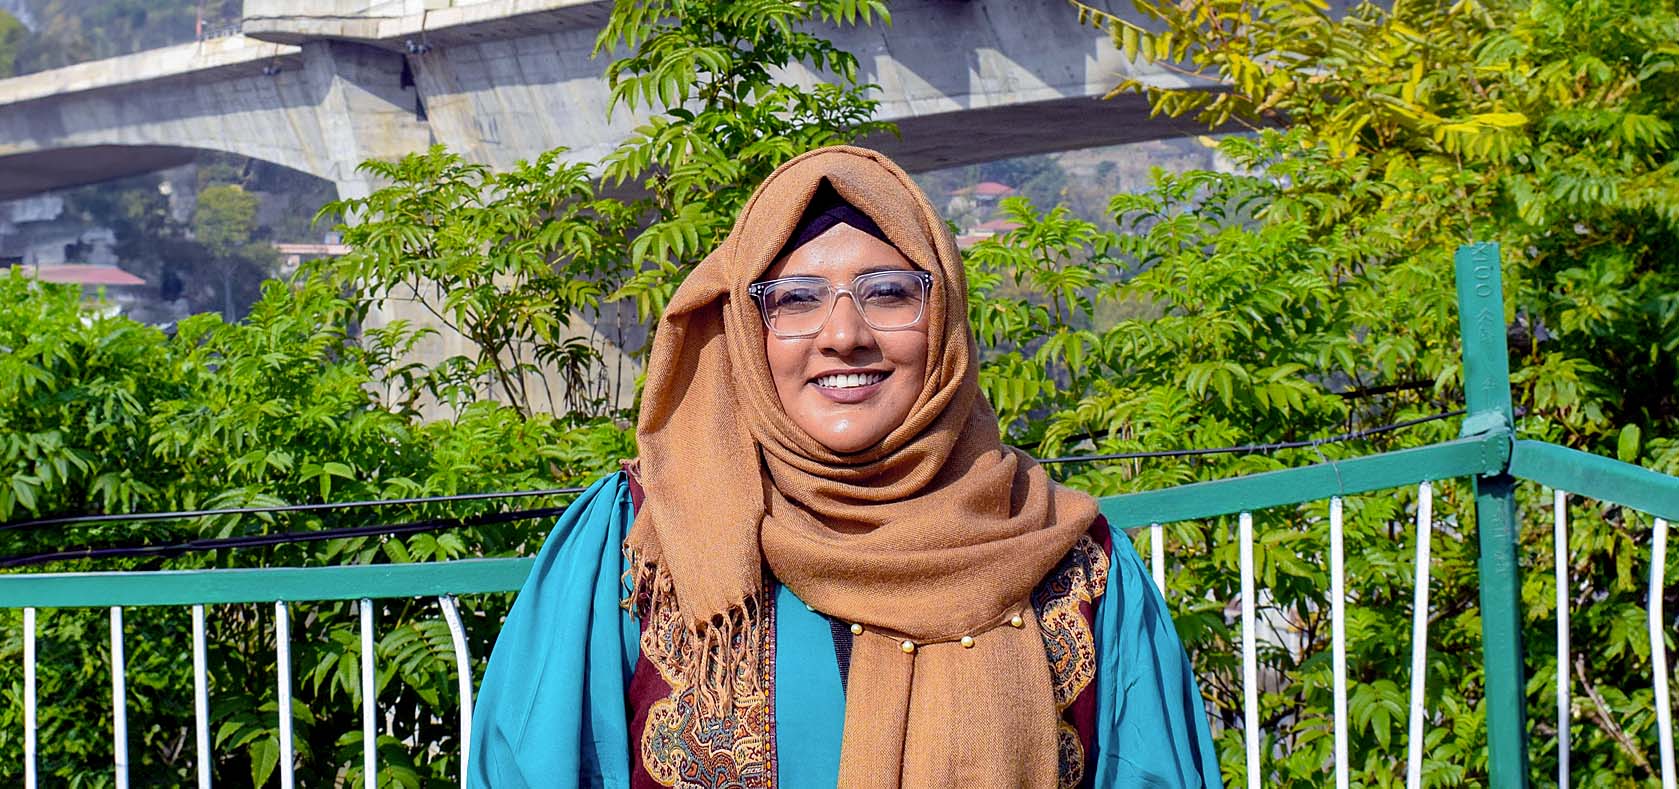 A smiling woman with glasses and a hijab, wearing a teal dress with a brown scarf, sits outside with greenery and a bridge in the background.  Photo courtesy of Maryam Eqan